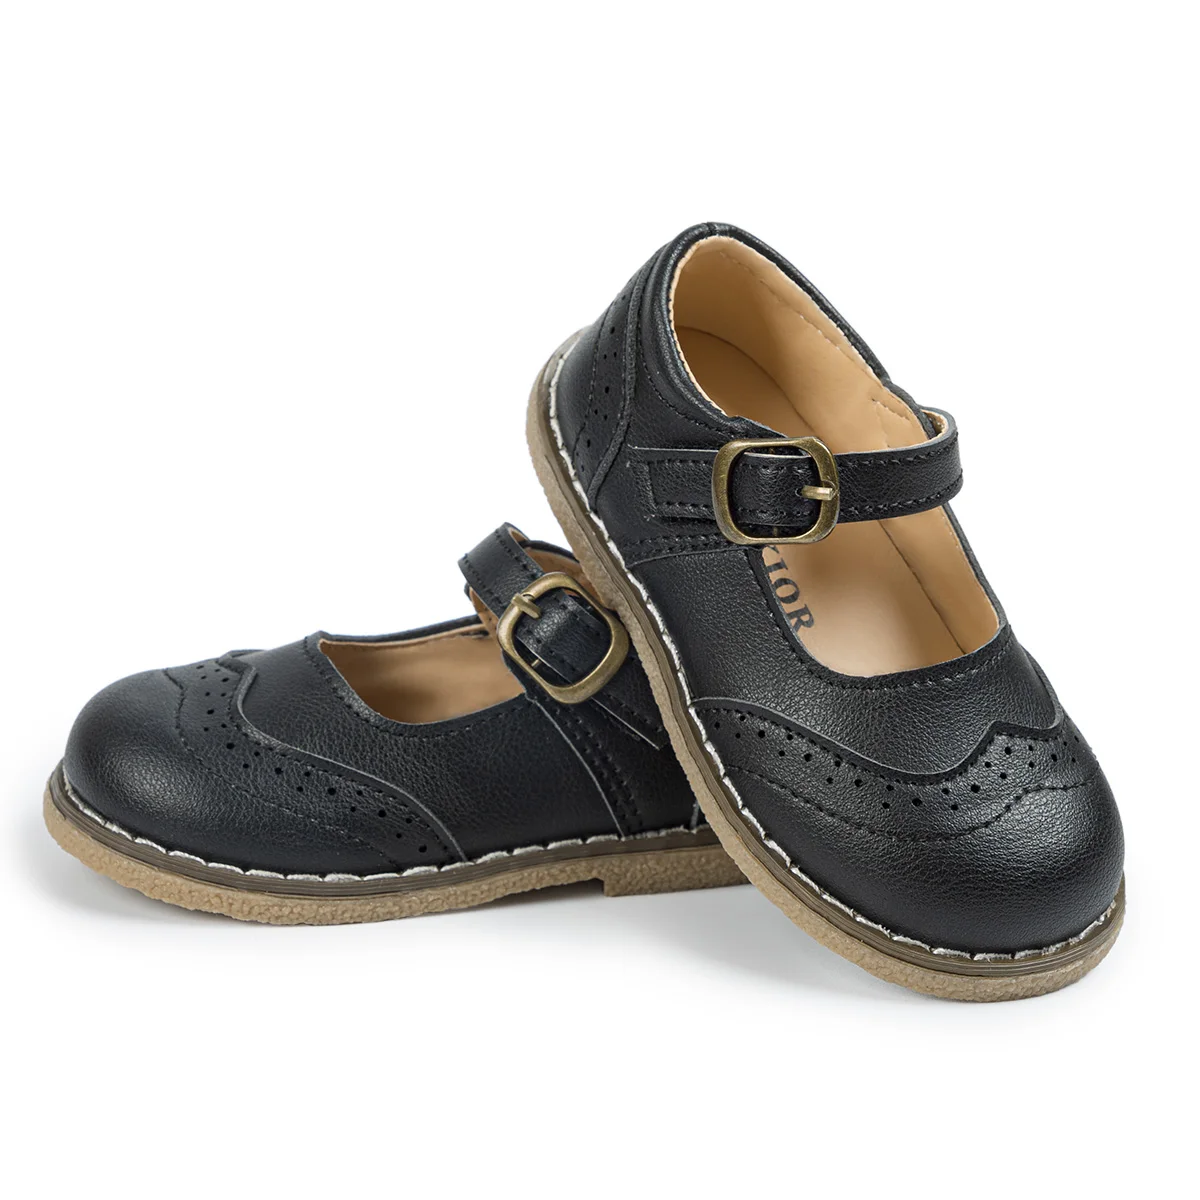 New Products Princess Wedding Black School Shoes Rubber Sole Non-Slip Pu Leather Kids Dress Shoes